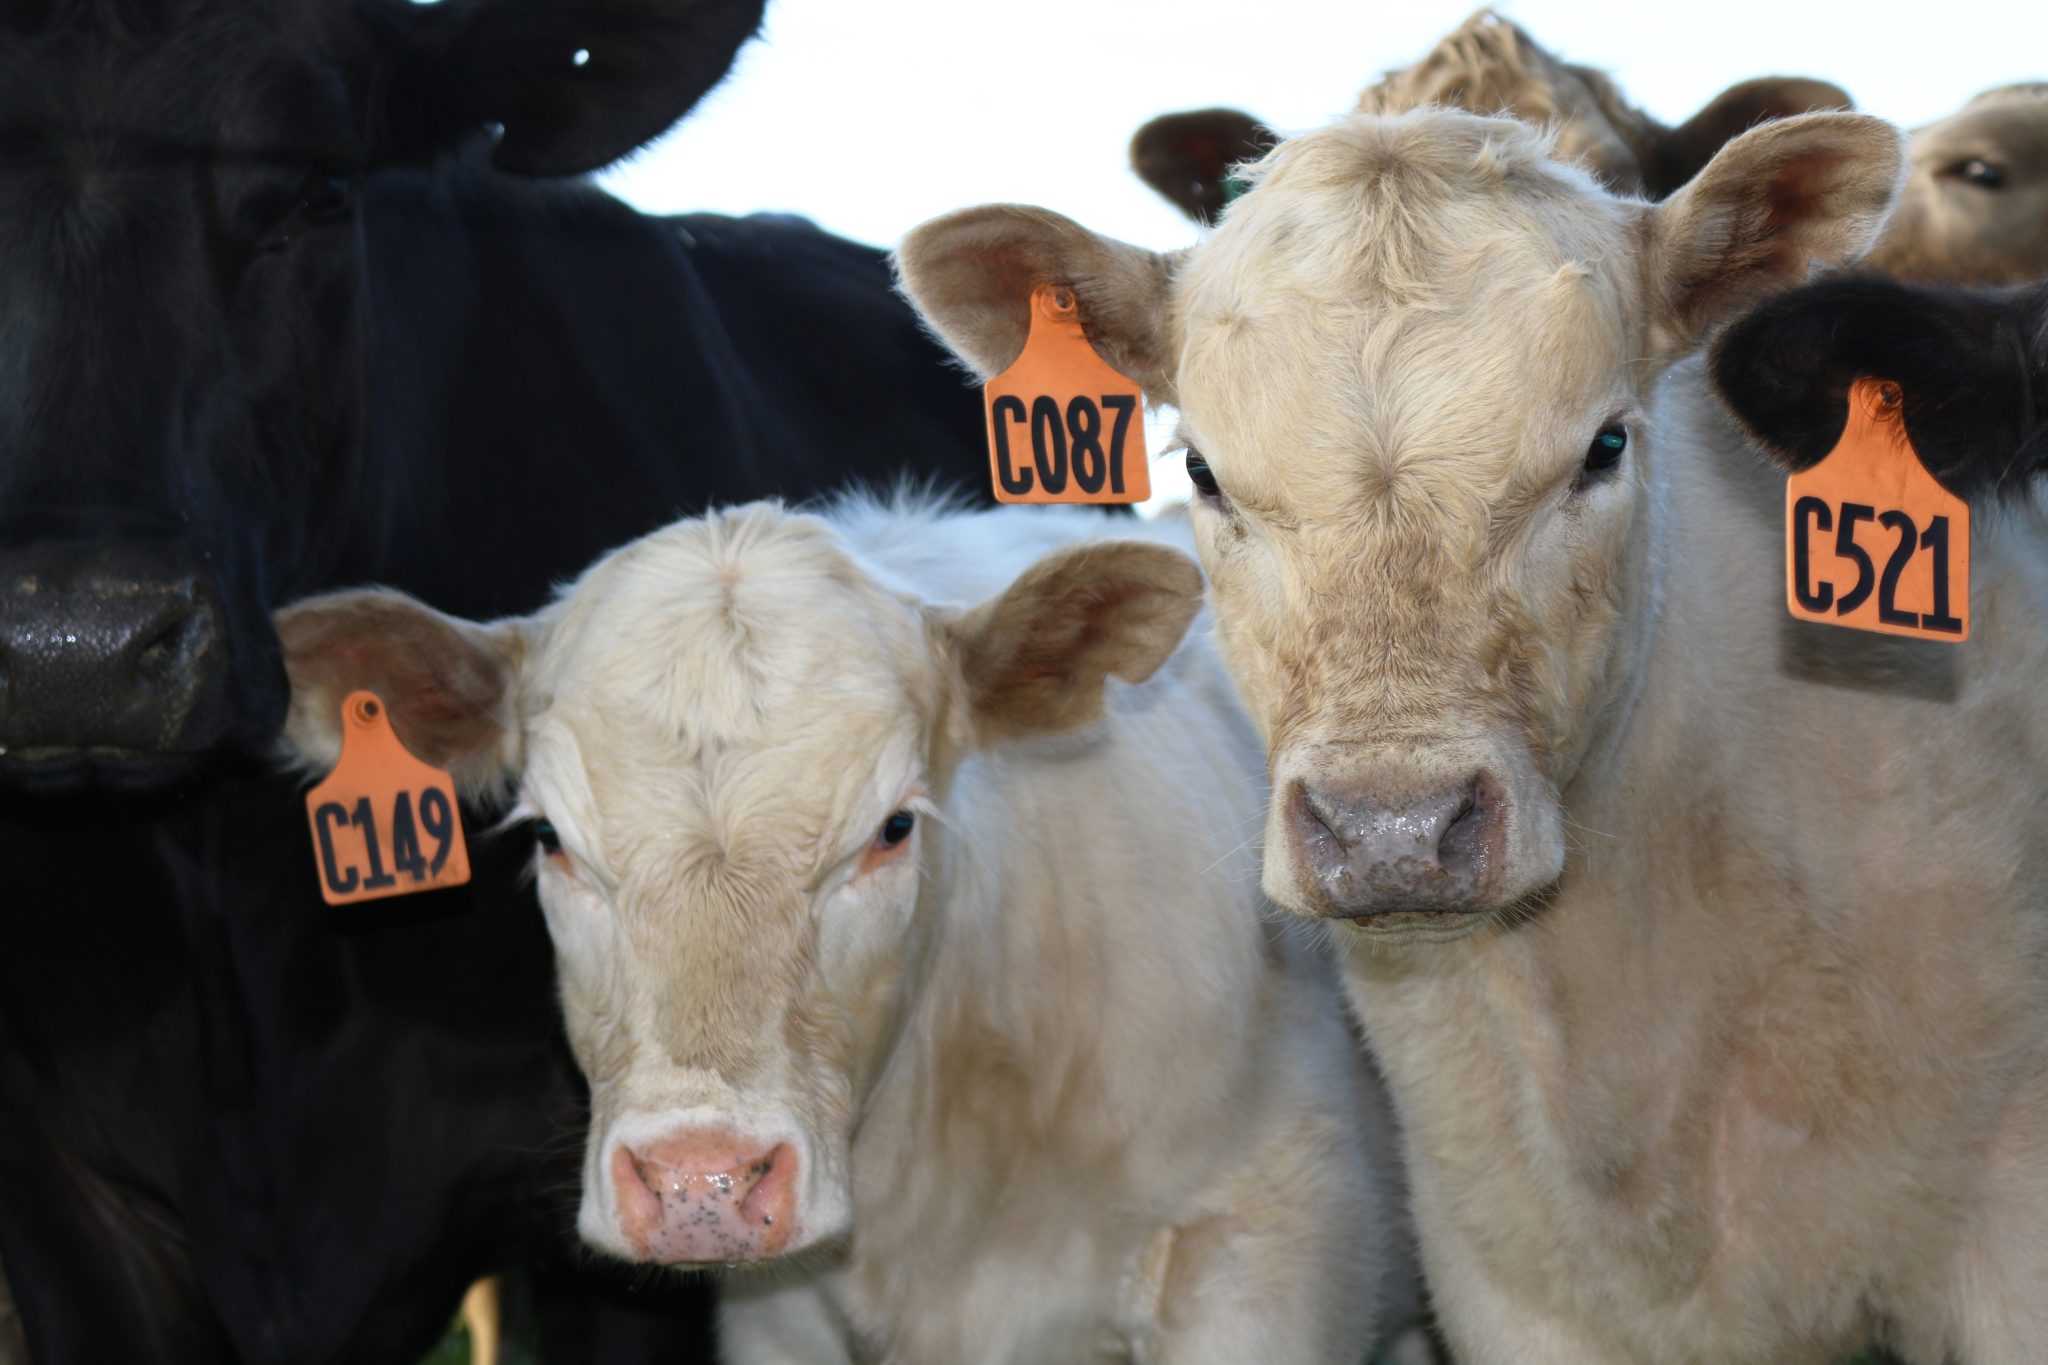 two commercial calves